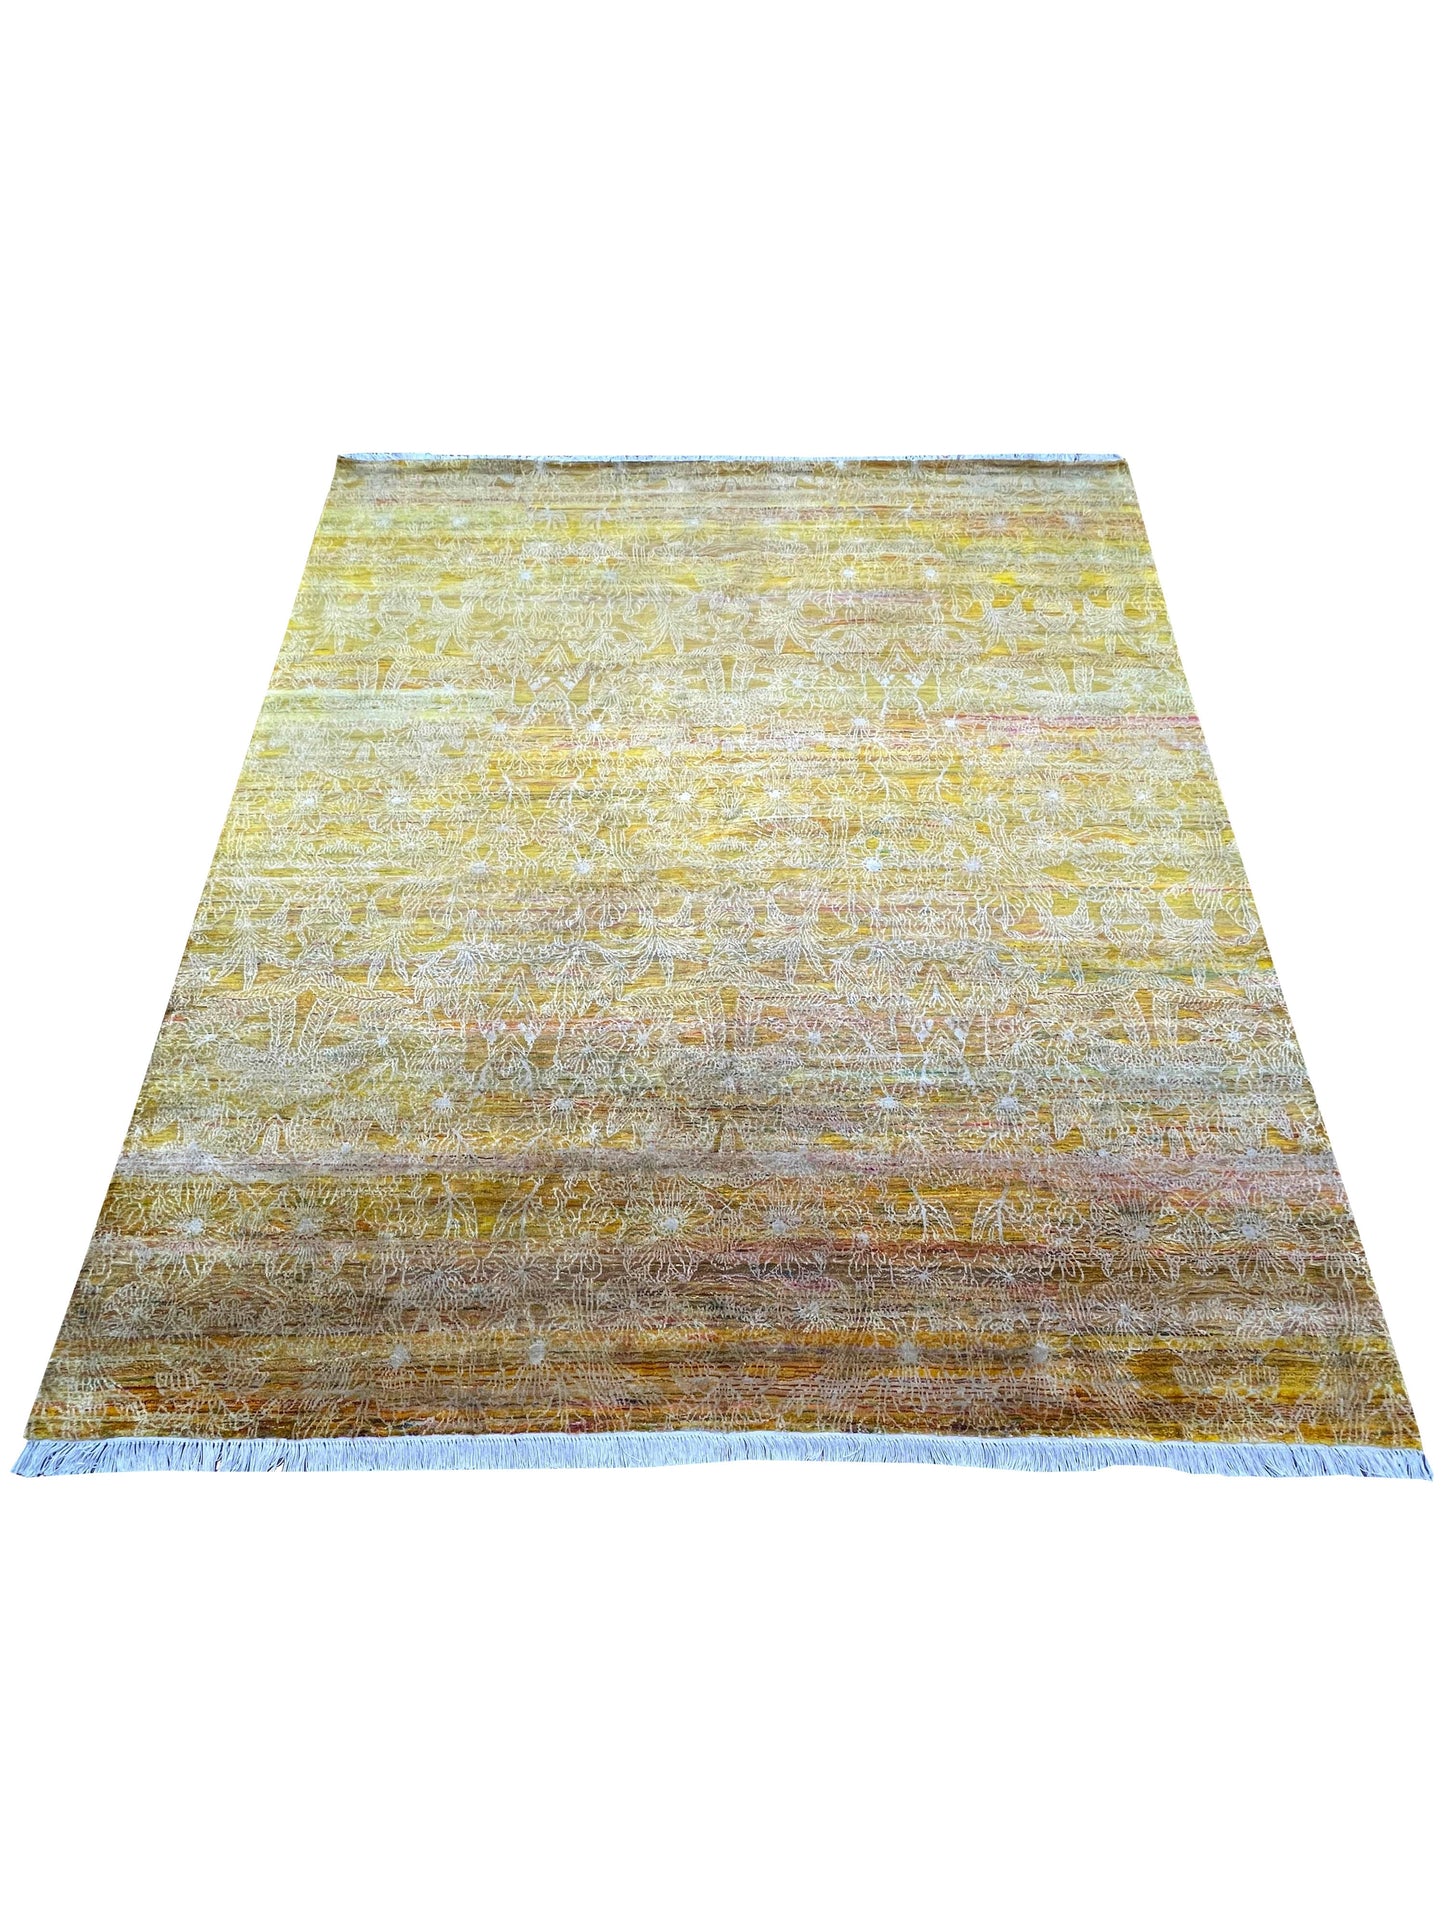 Get trendy with Yellow Sari Silk Traditional Handknotted Area Rug 8.0x9.4ft 244x284Cms - Traditional Rugs available at Jaipur Oriental Rugs. Grab yours for $5425.00 today!